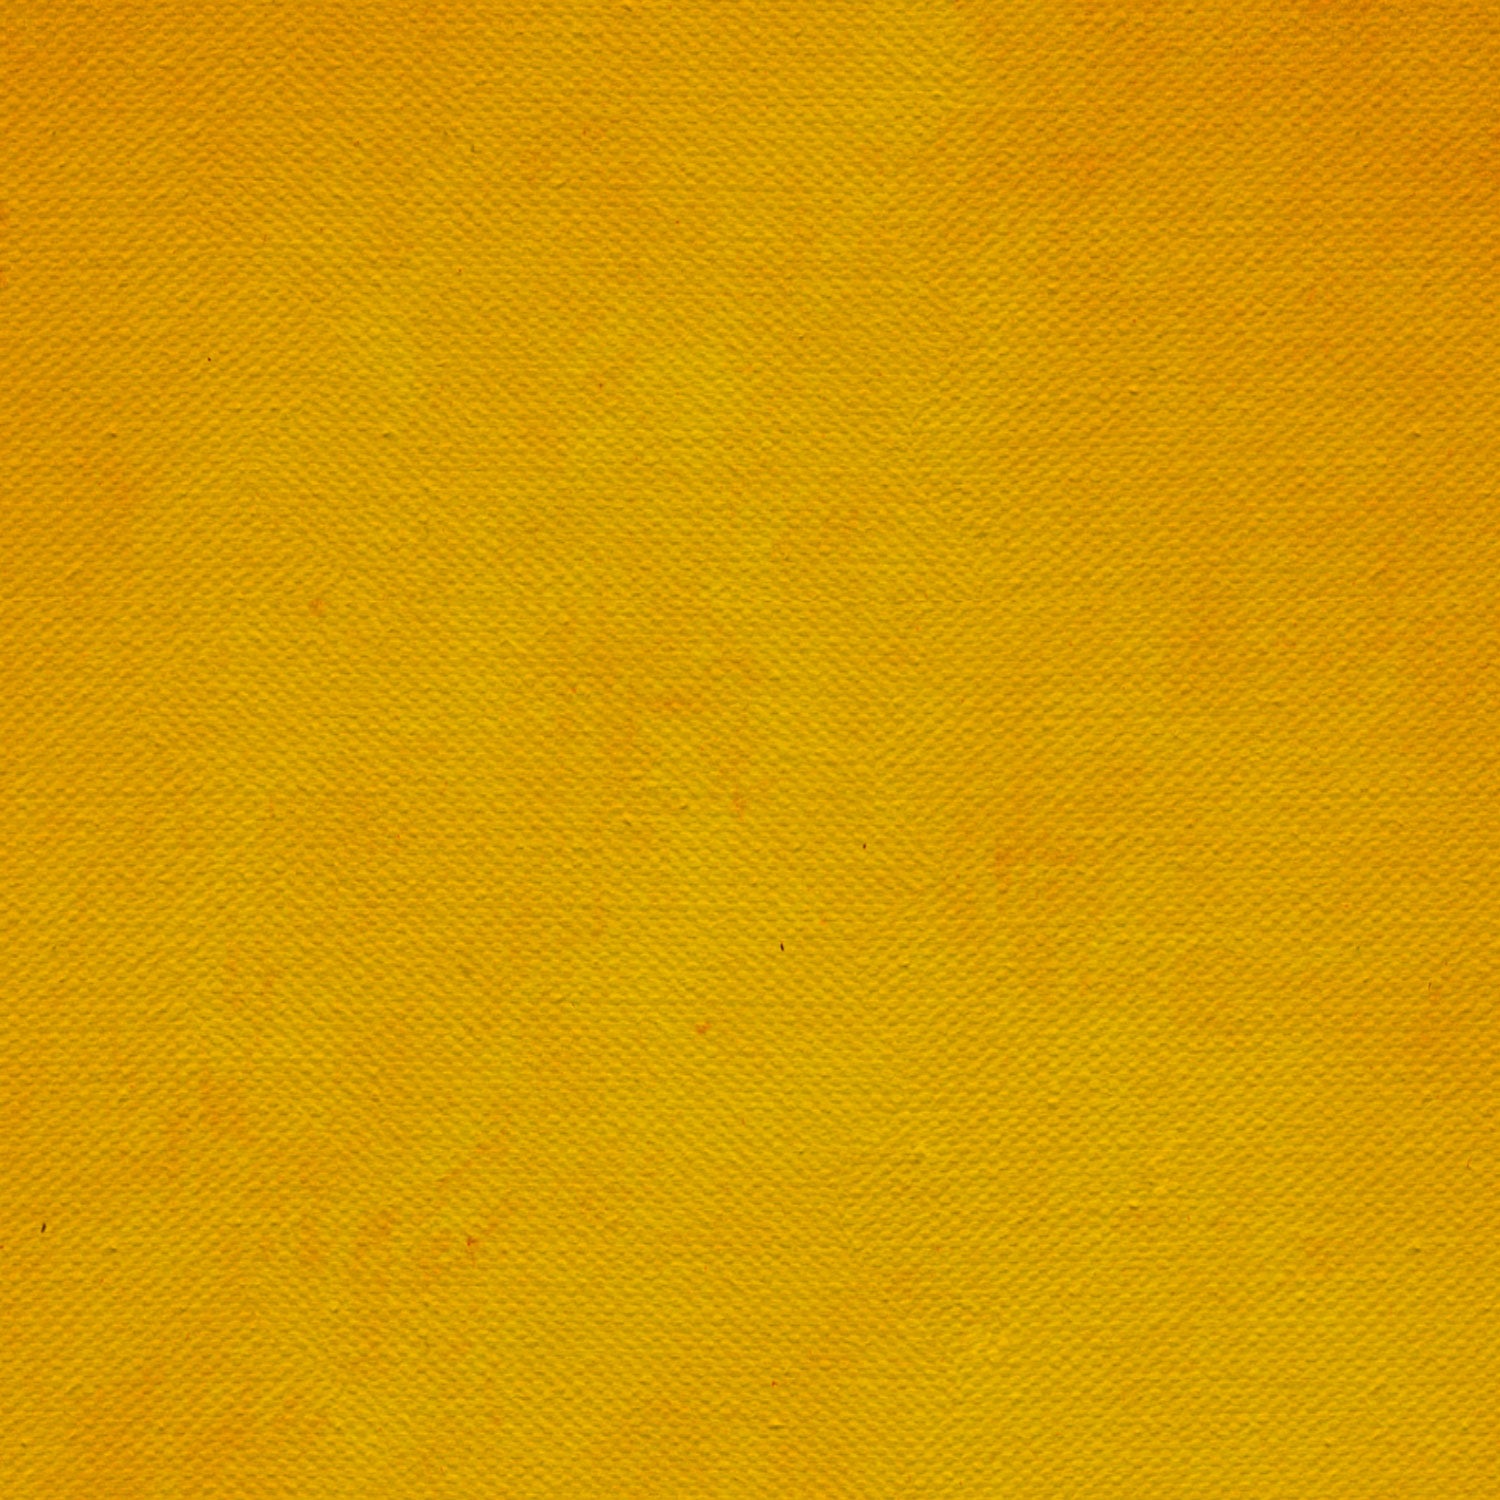 Mark Rothko Yellow And Red Canvas Wall Art